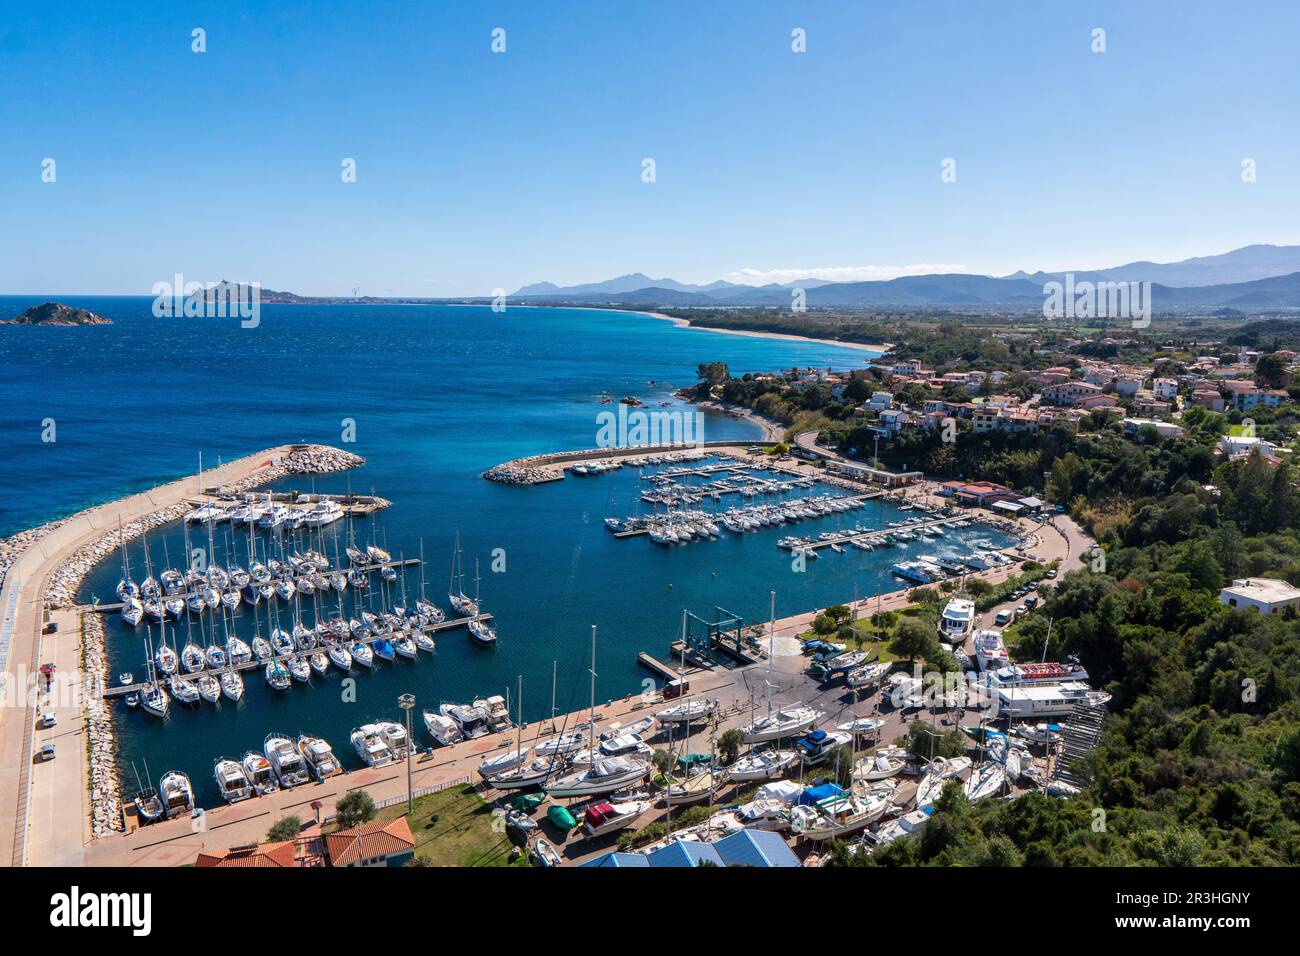 Santa Maria Navarrese, Italy - 09/07/2019: The port of the little town Stock Photo